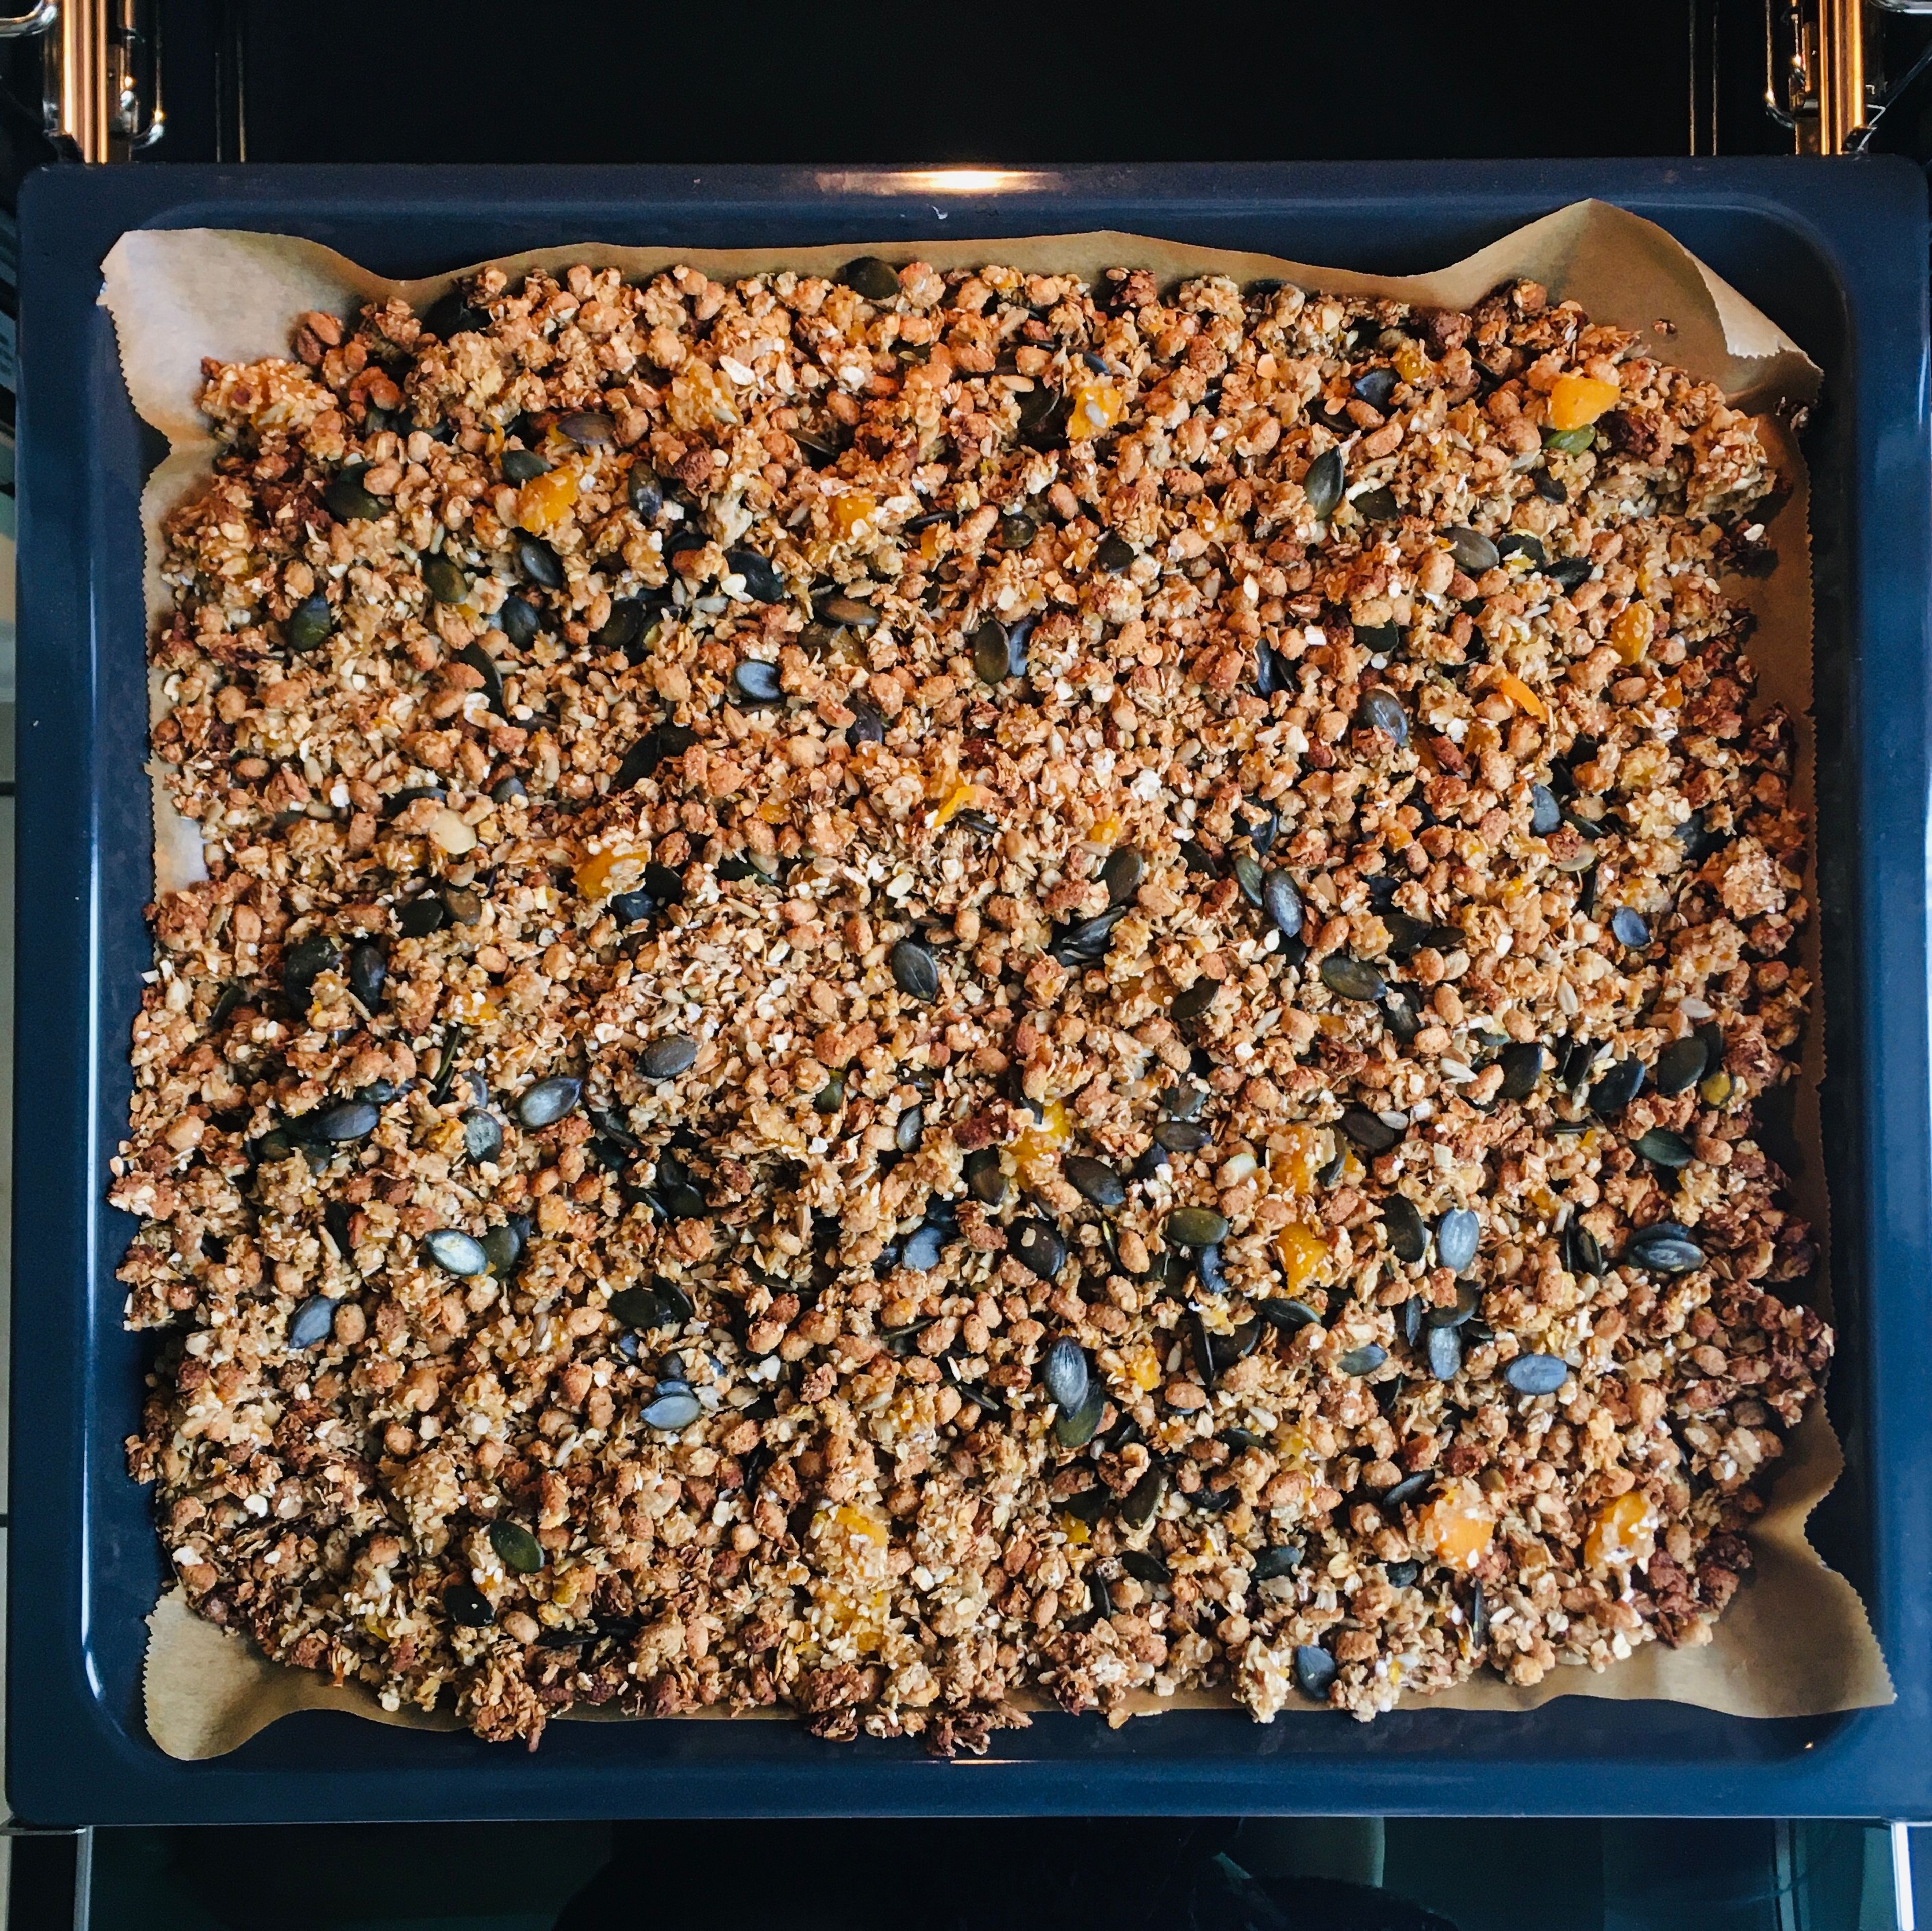 Bake on the mid rack for approx. 30 min. until the granola is golden brown. Take it out every 10 min. and stir it carefully so nothing gets burnt. After 20 min, sprinkle pumpkin seeds and pecans on the granola and let it bake for the final 10 min.